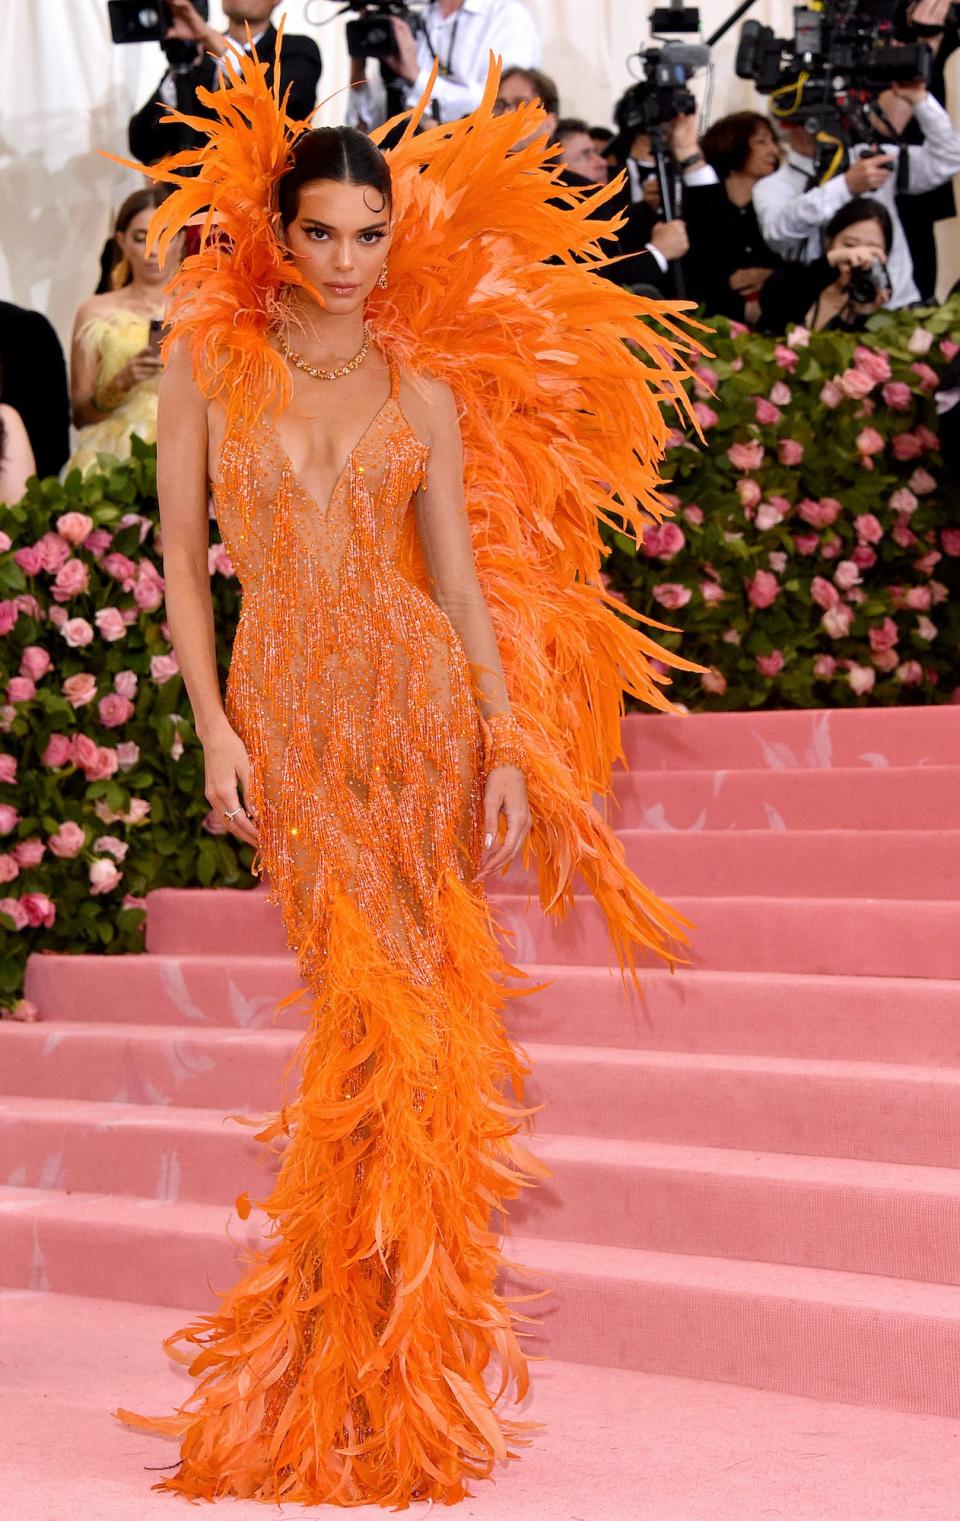 Kendall Jenner attends the 2019 Met Gala.